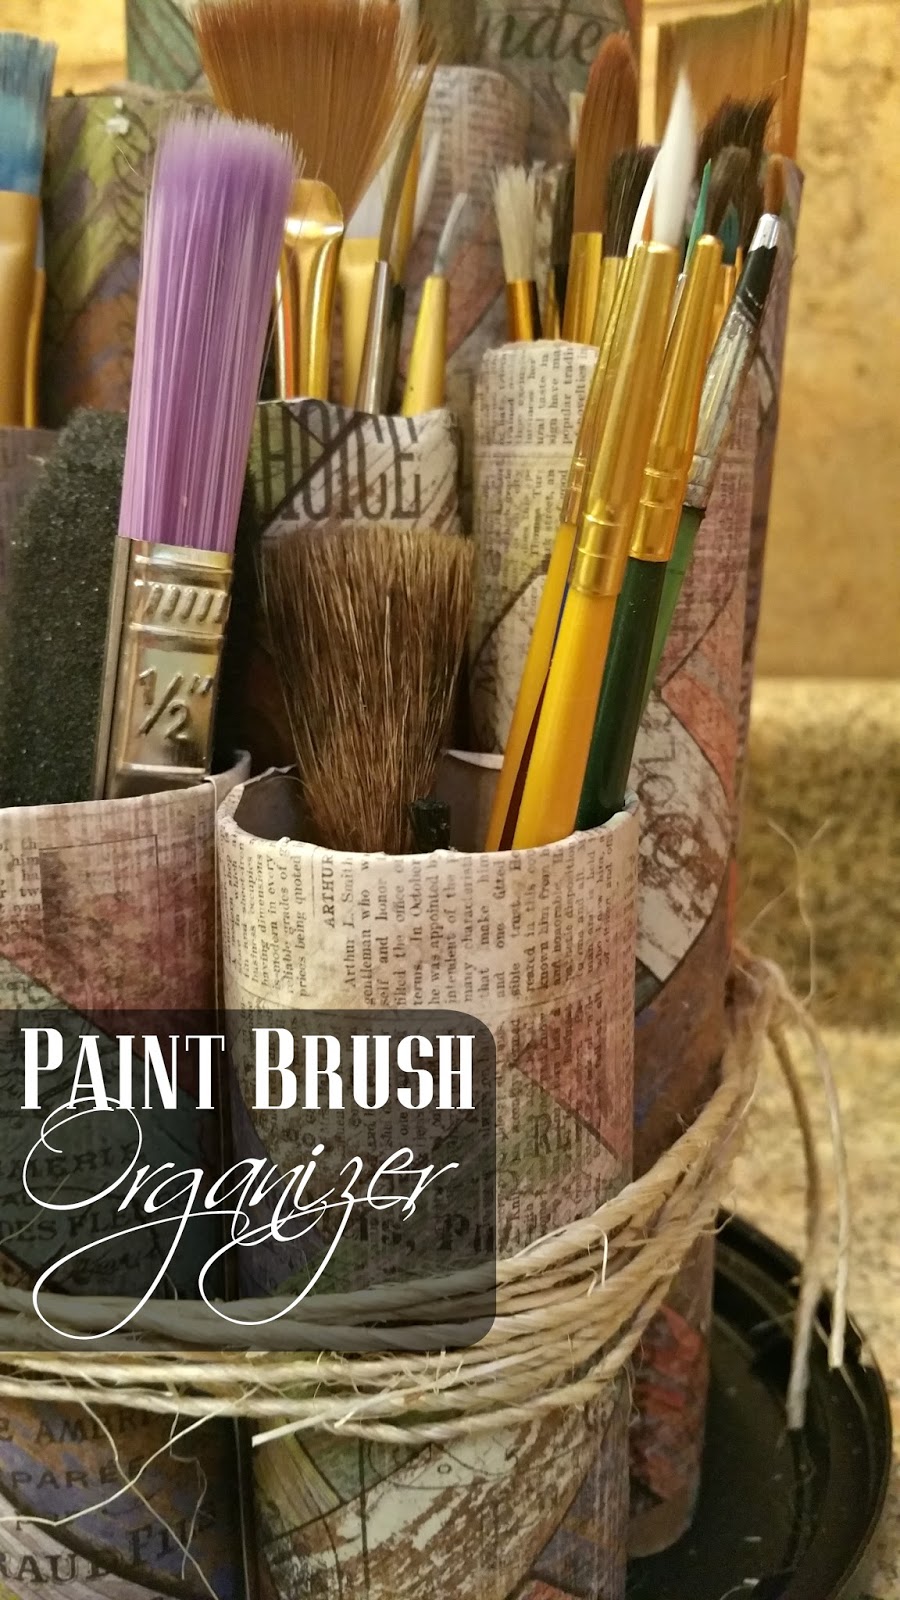 Redo It Yourself Inspirations : Paint Brush Holder: Recycled Paper Rolls